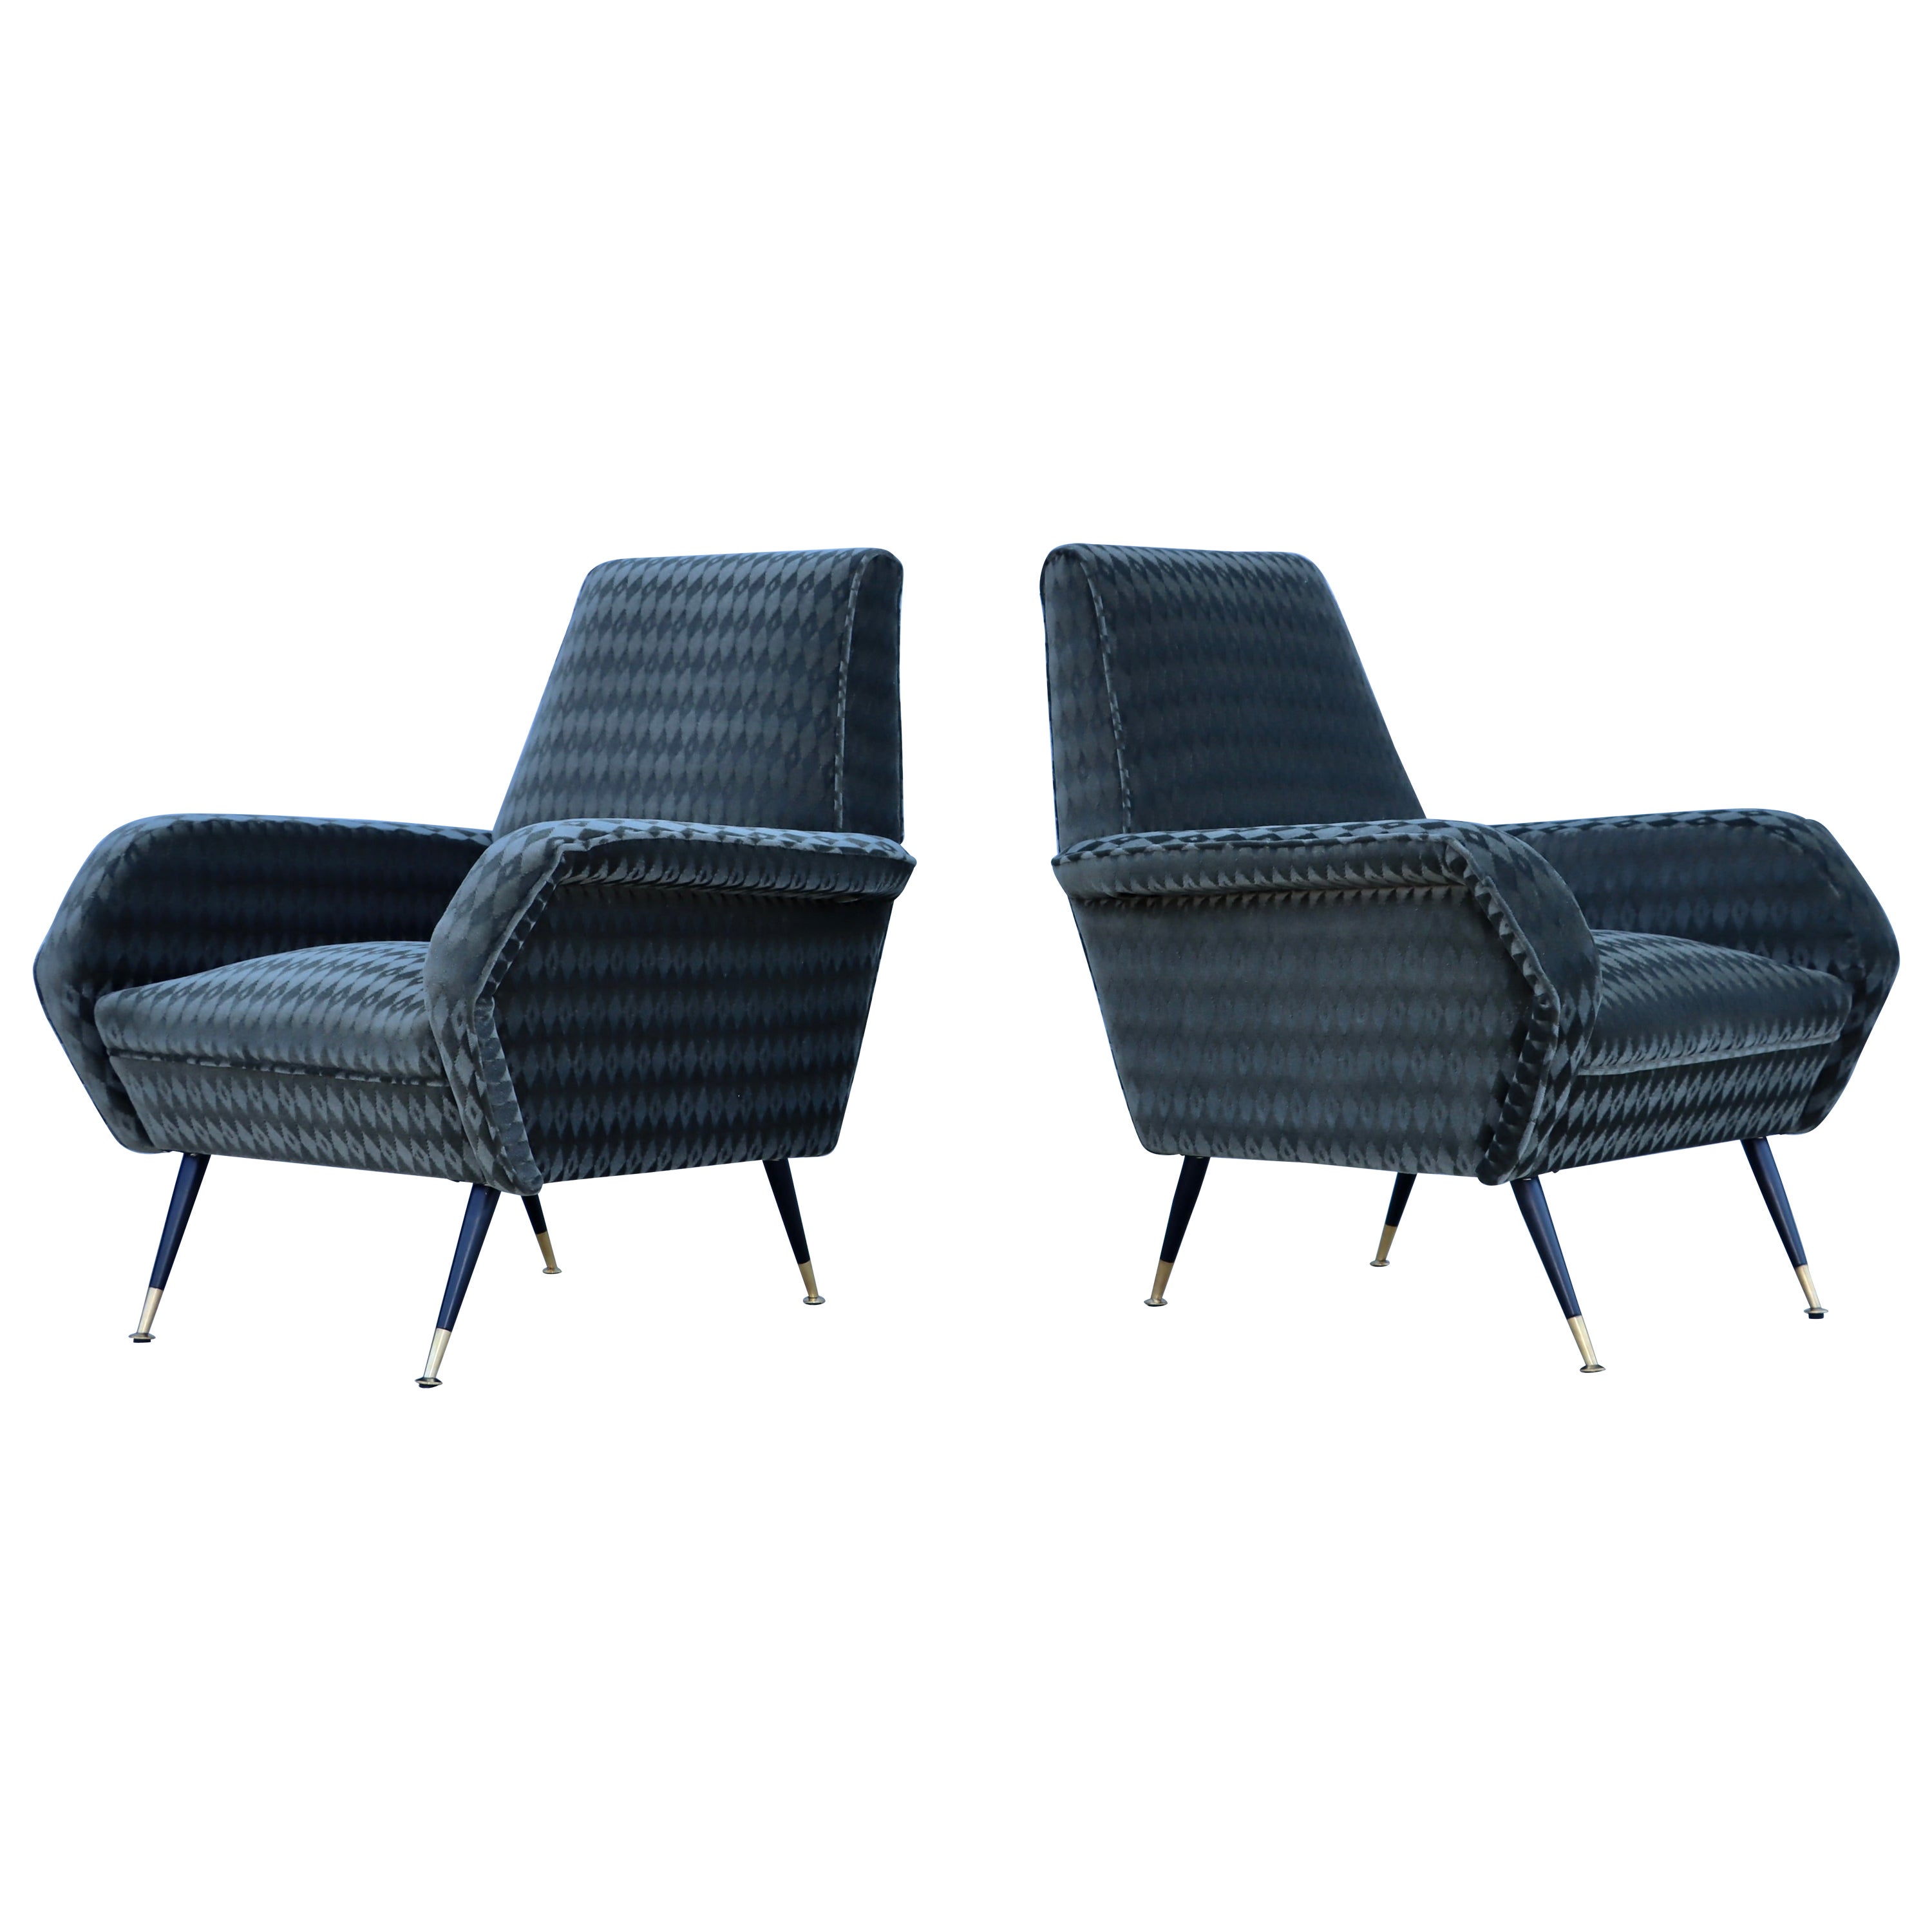 1950's Mid-Century Modern Italian Lounge Chairs With Donghia Mohair Upholstery For Sale